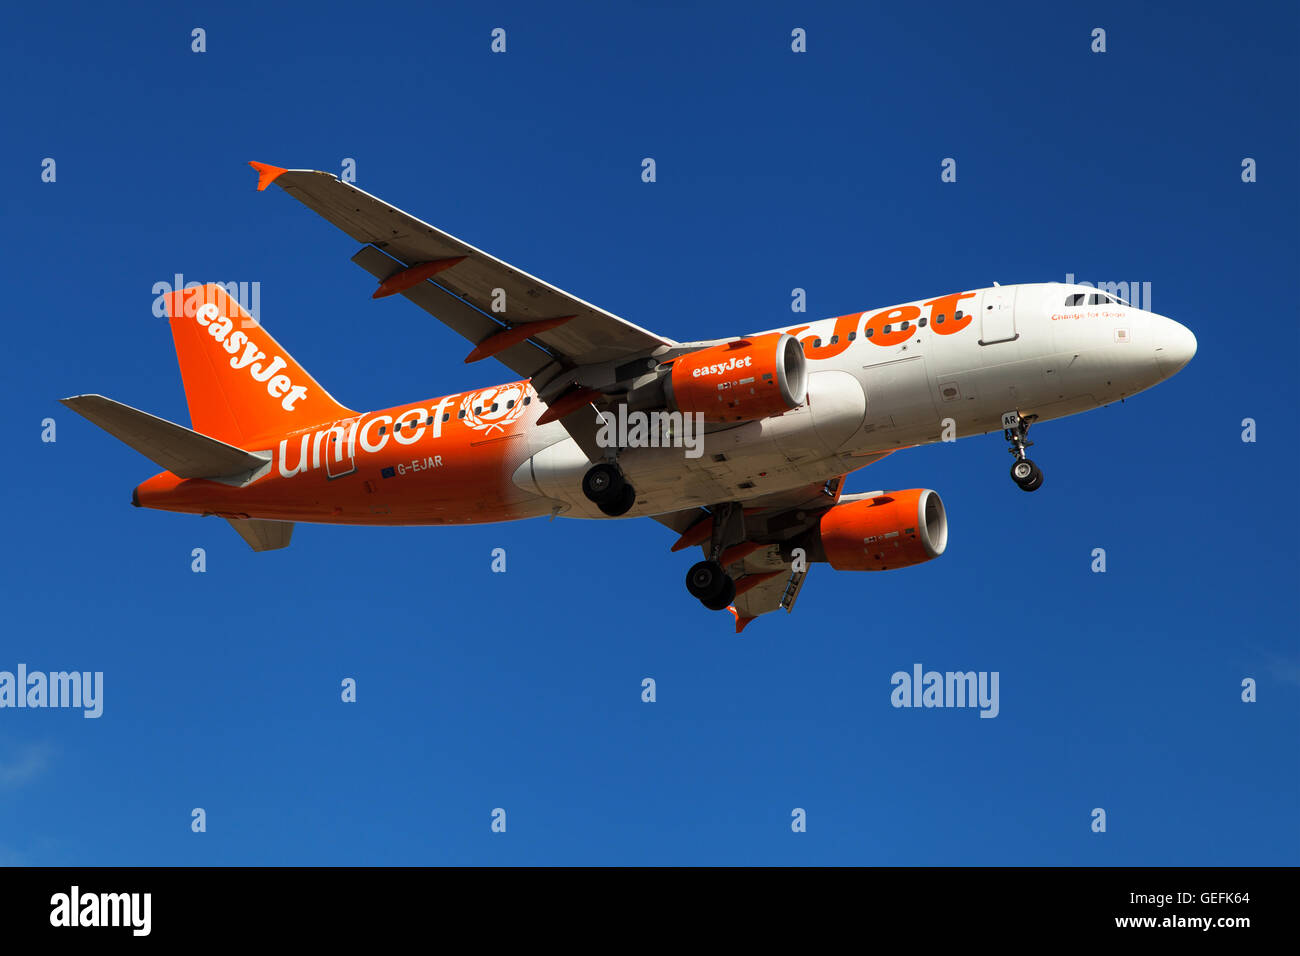 An Easyjet Airbus A319-100 wearing Unicef special livery approaching to El Prat Airport in Barcelona, Spain. Stock Photo